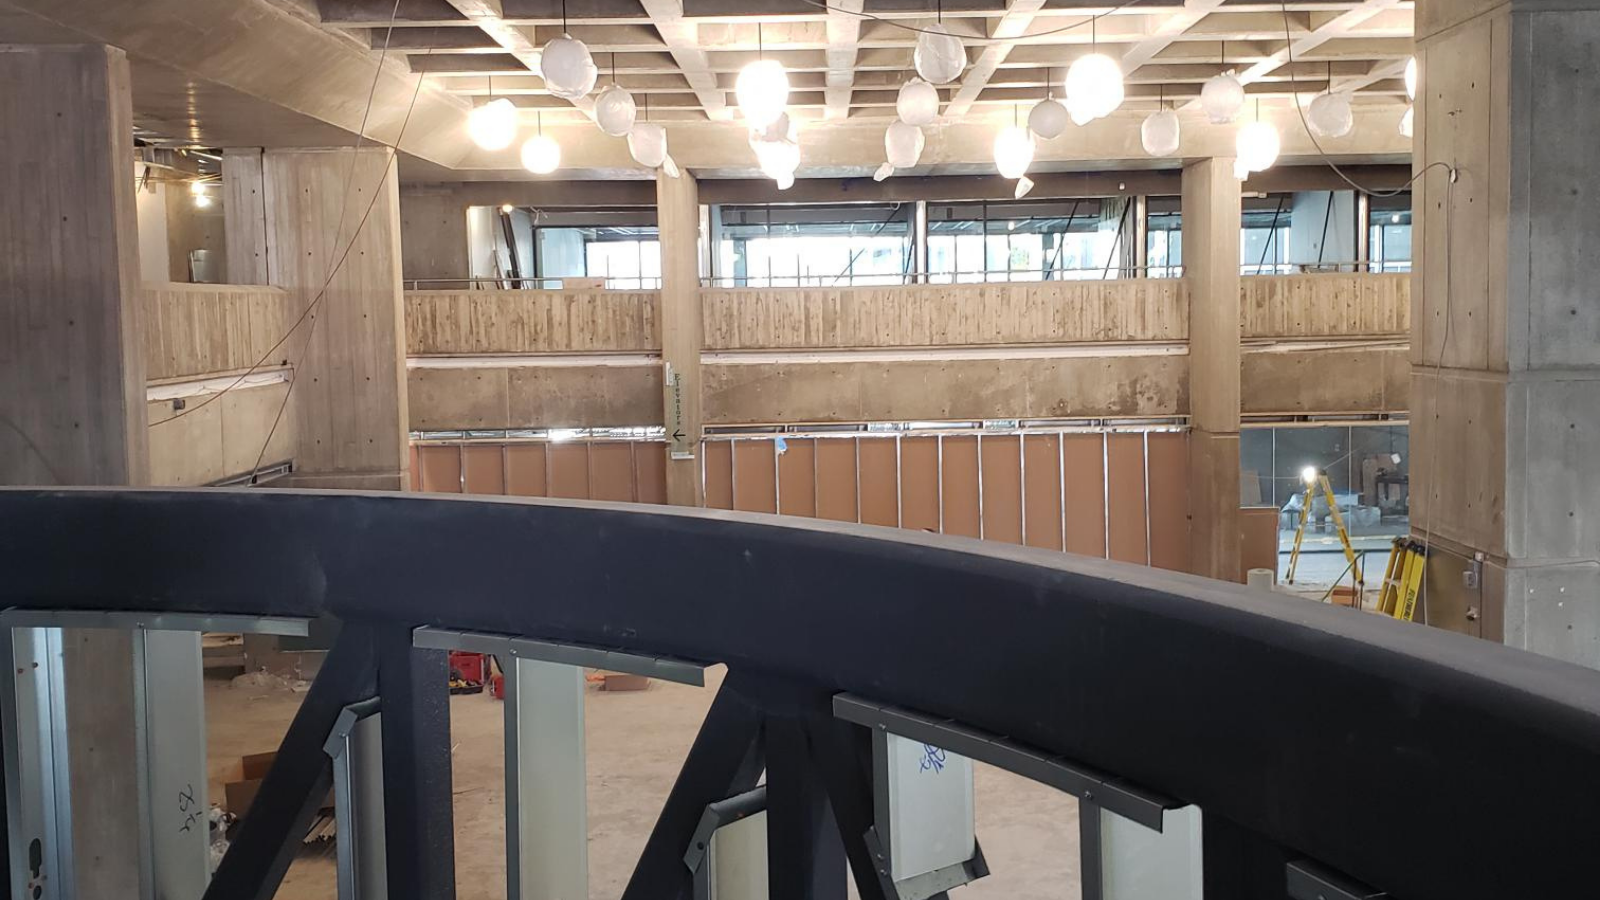 View from the top of the new Learning Commons stairs in Weldon Library